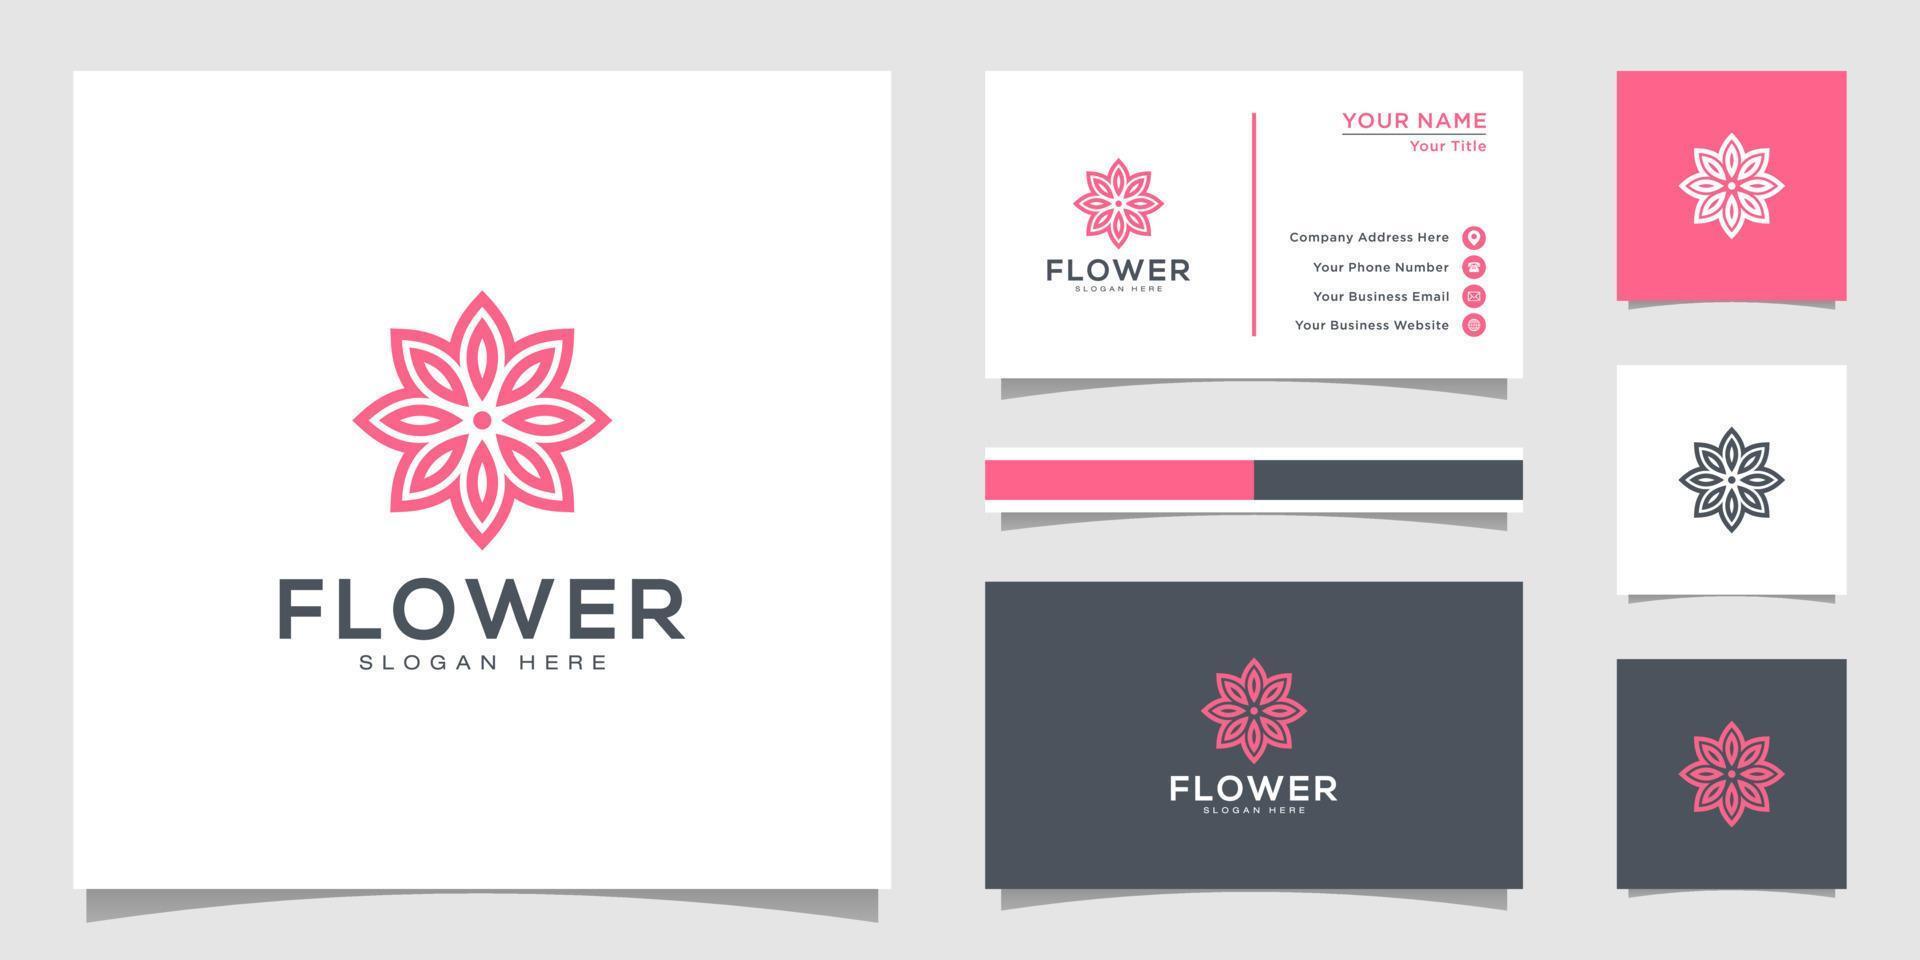 Flower logo design with line art style. logos can be used for spa, beauty salon, decoration, boutique. and business card vector